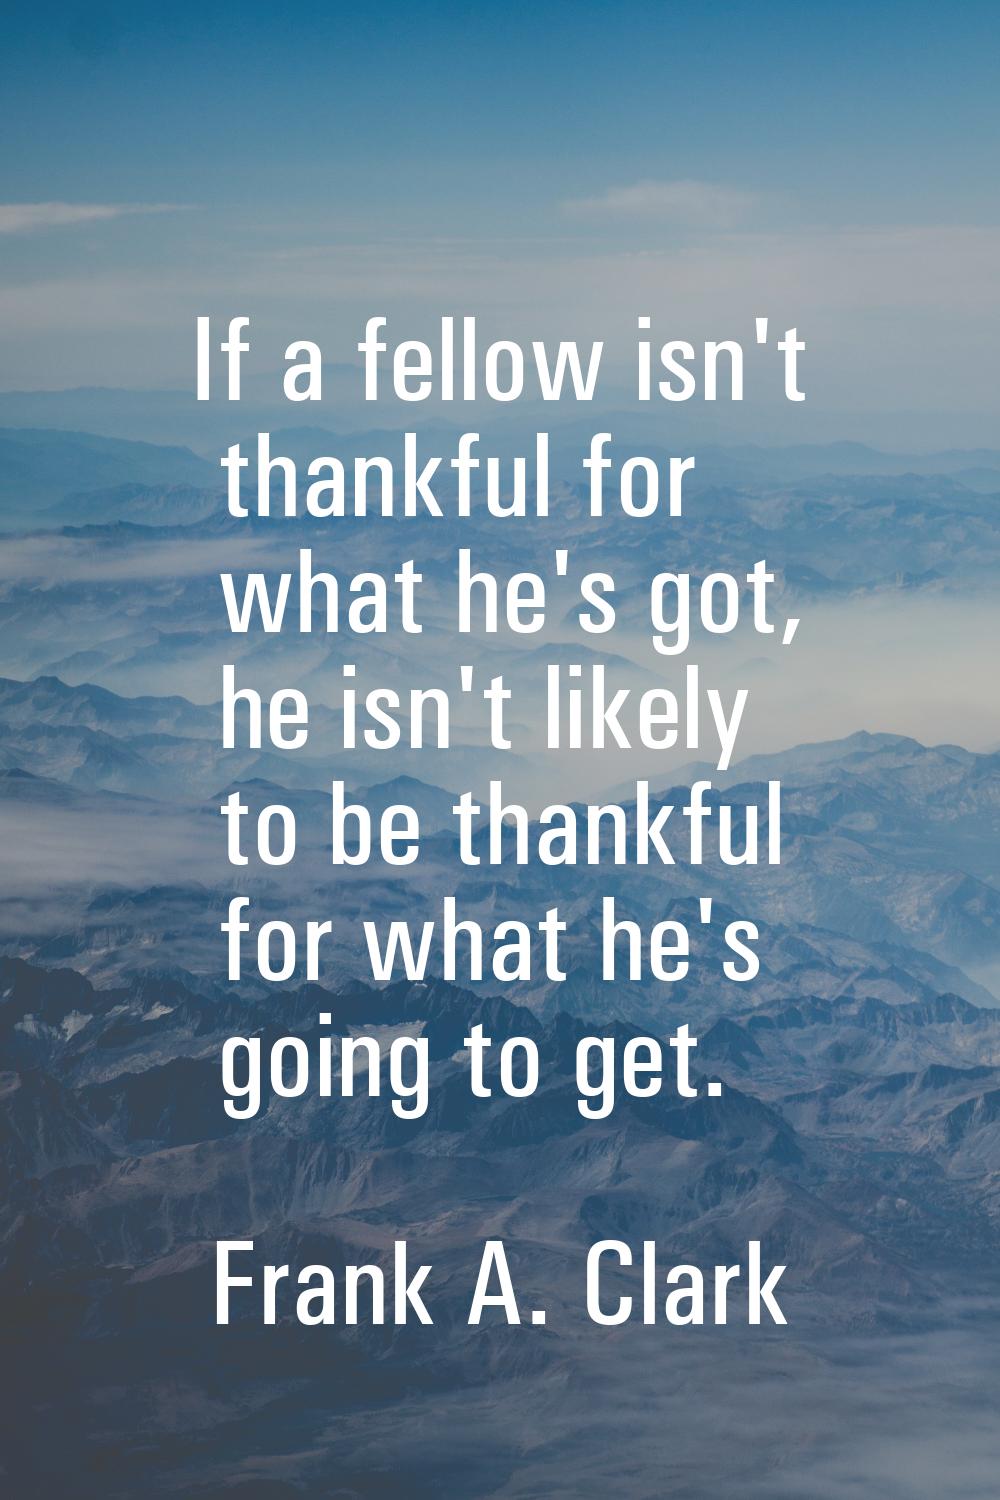 If a fellow isn't thankful for what he's got, he isn't likely to be thankful for what he's going to